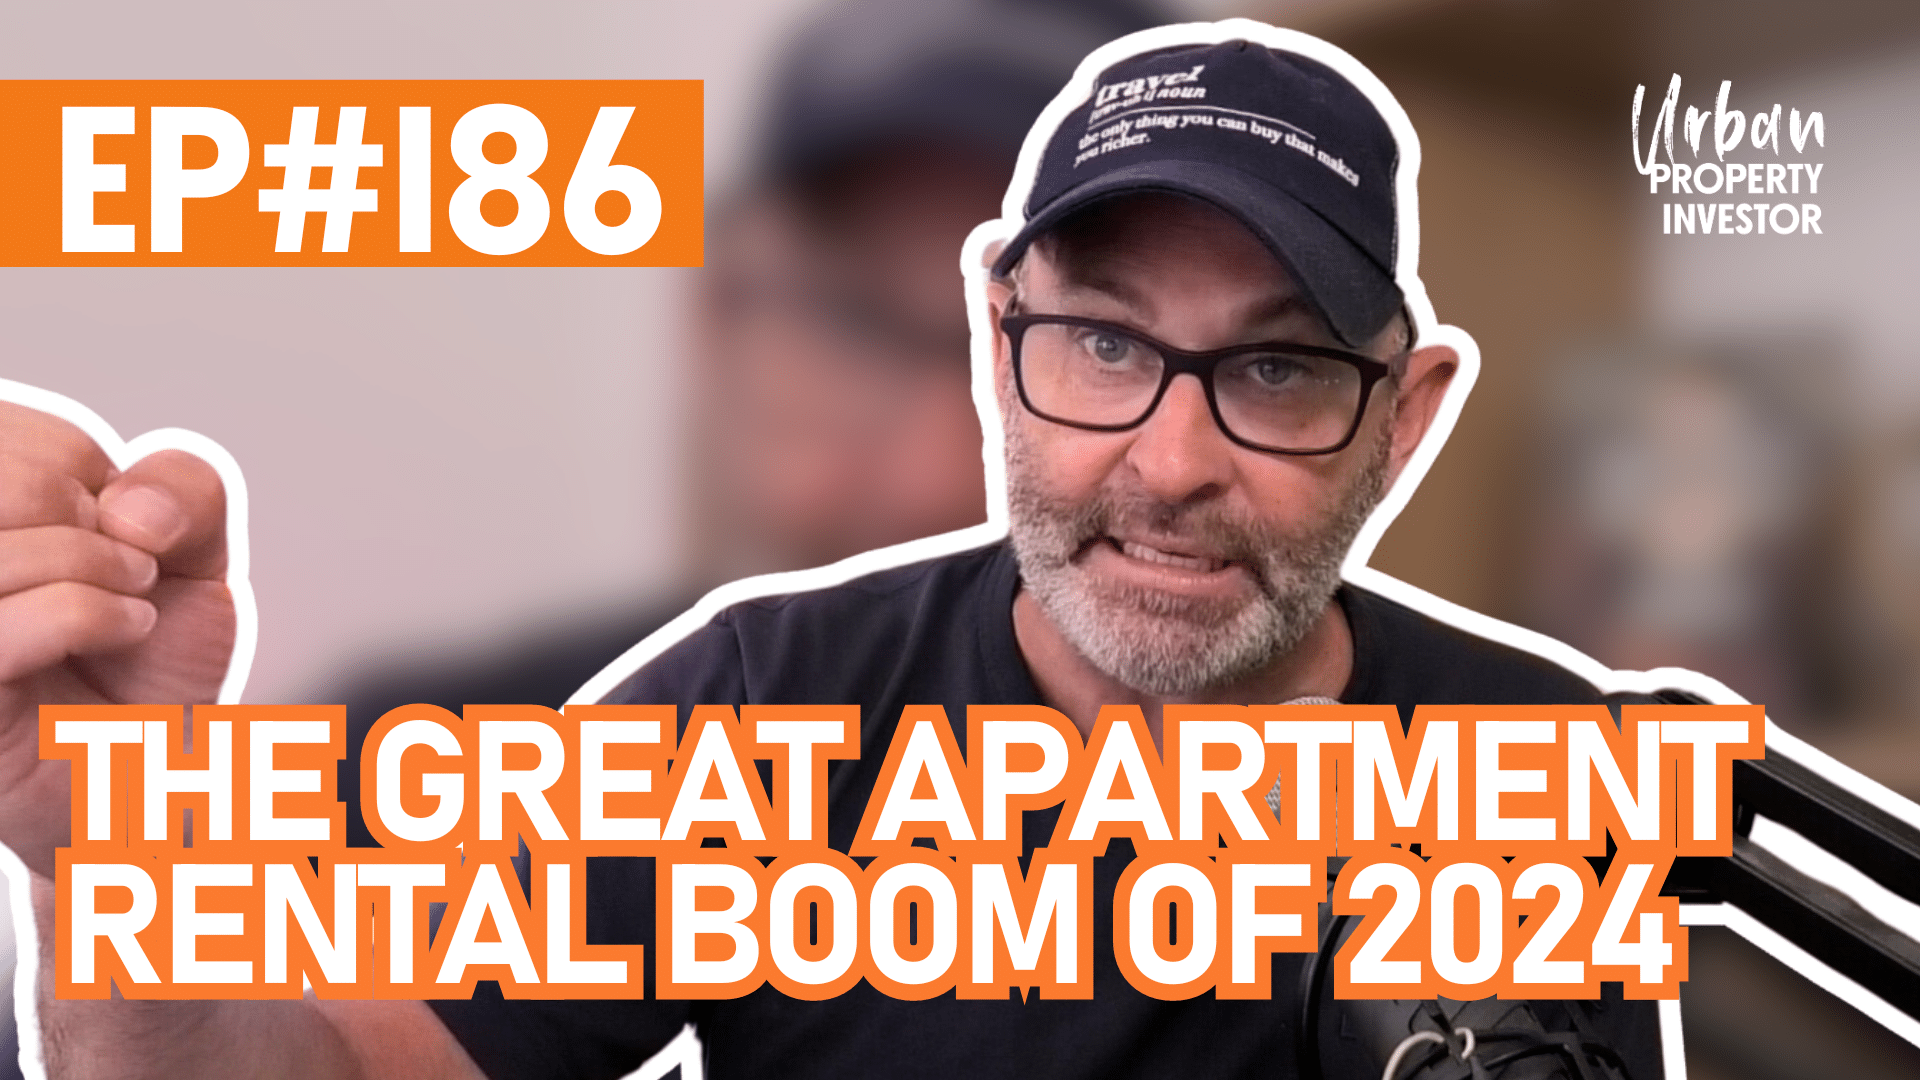 The Great Apartment Rental Boom of 2024